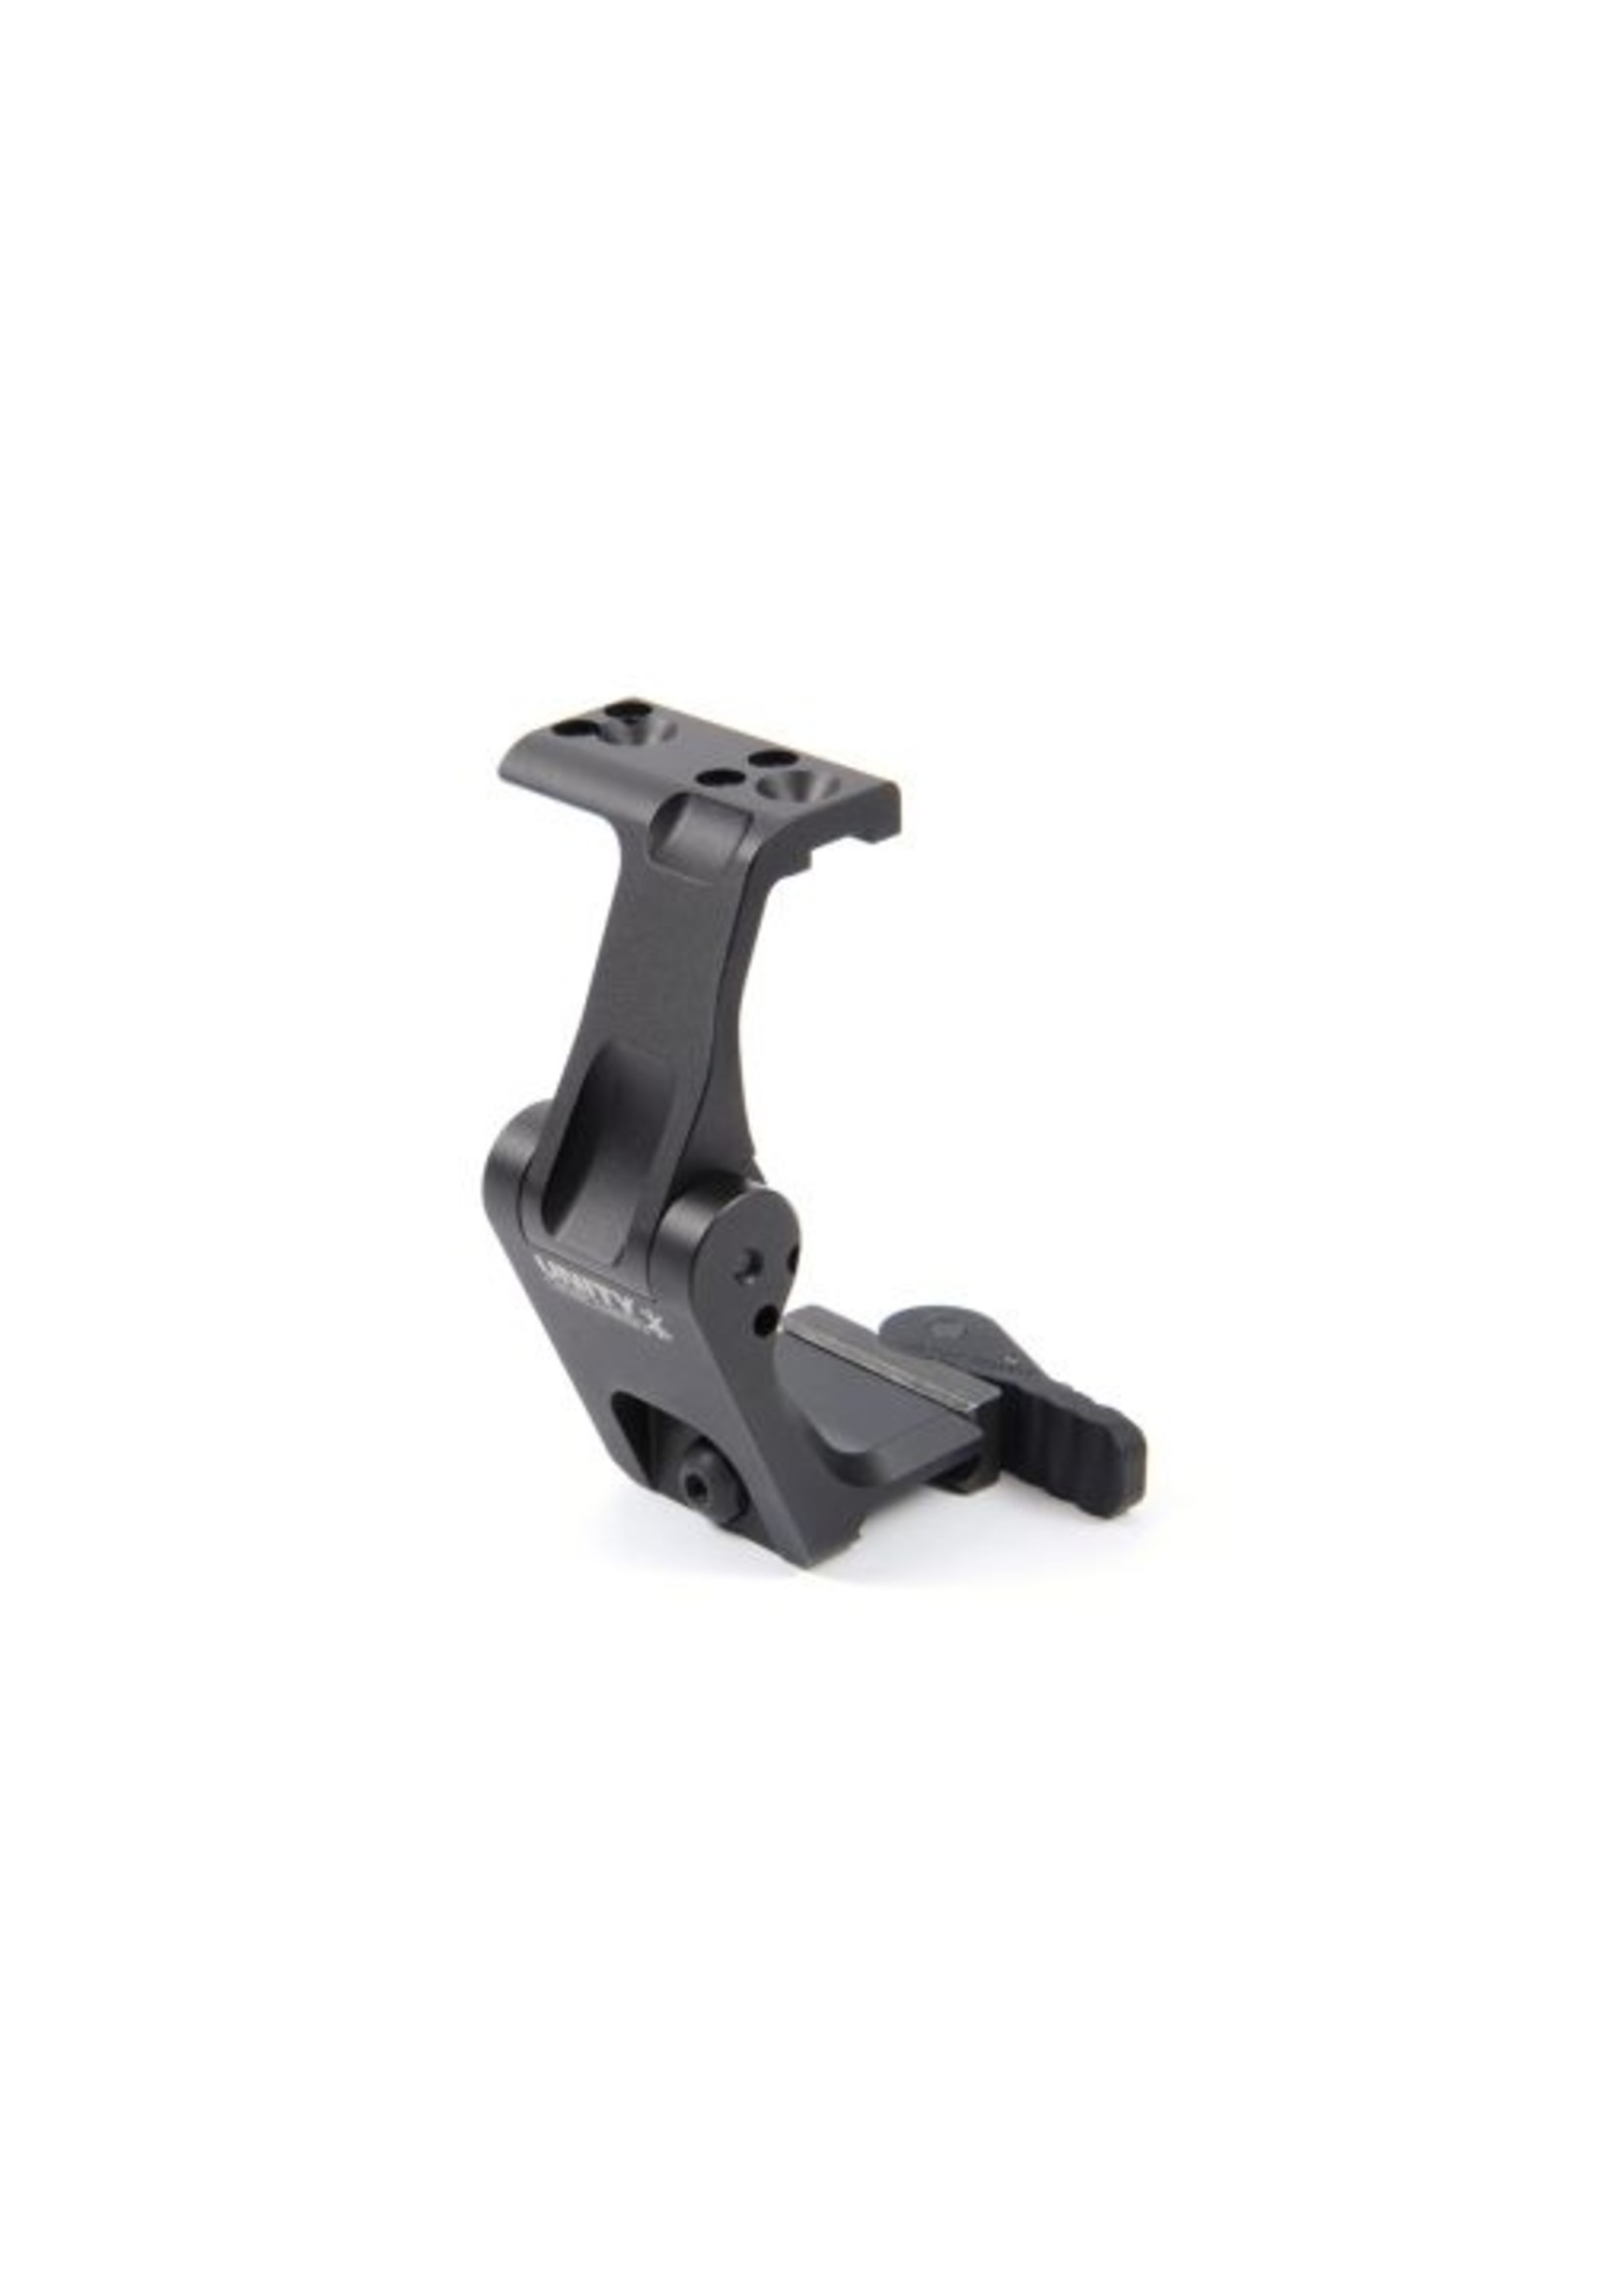 UNITY TACTICAL FAST FTC OMNI MAGNIFIER MOUNT